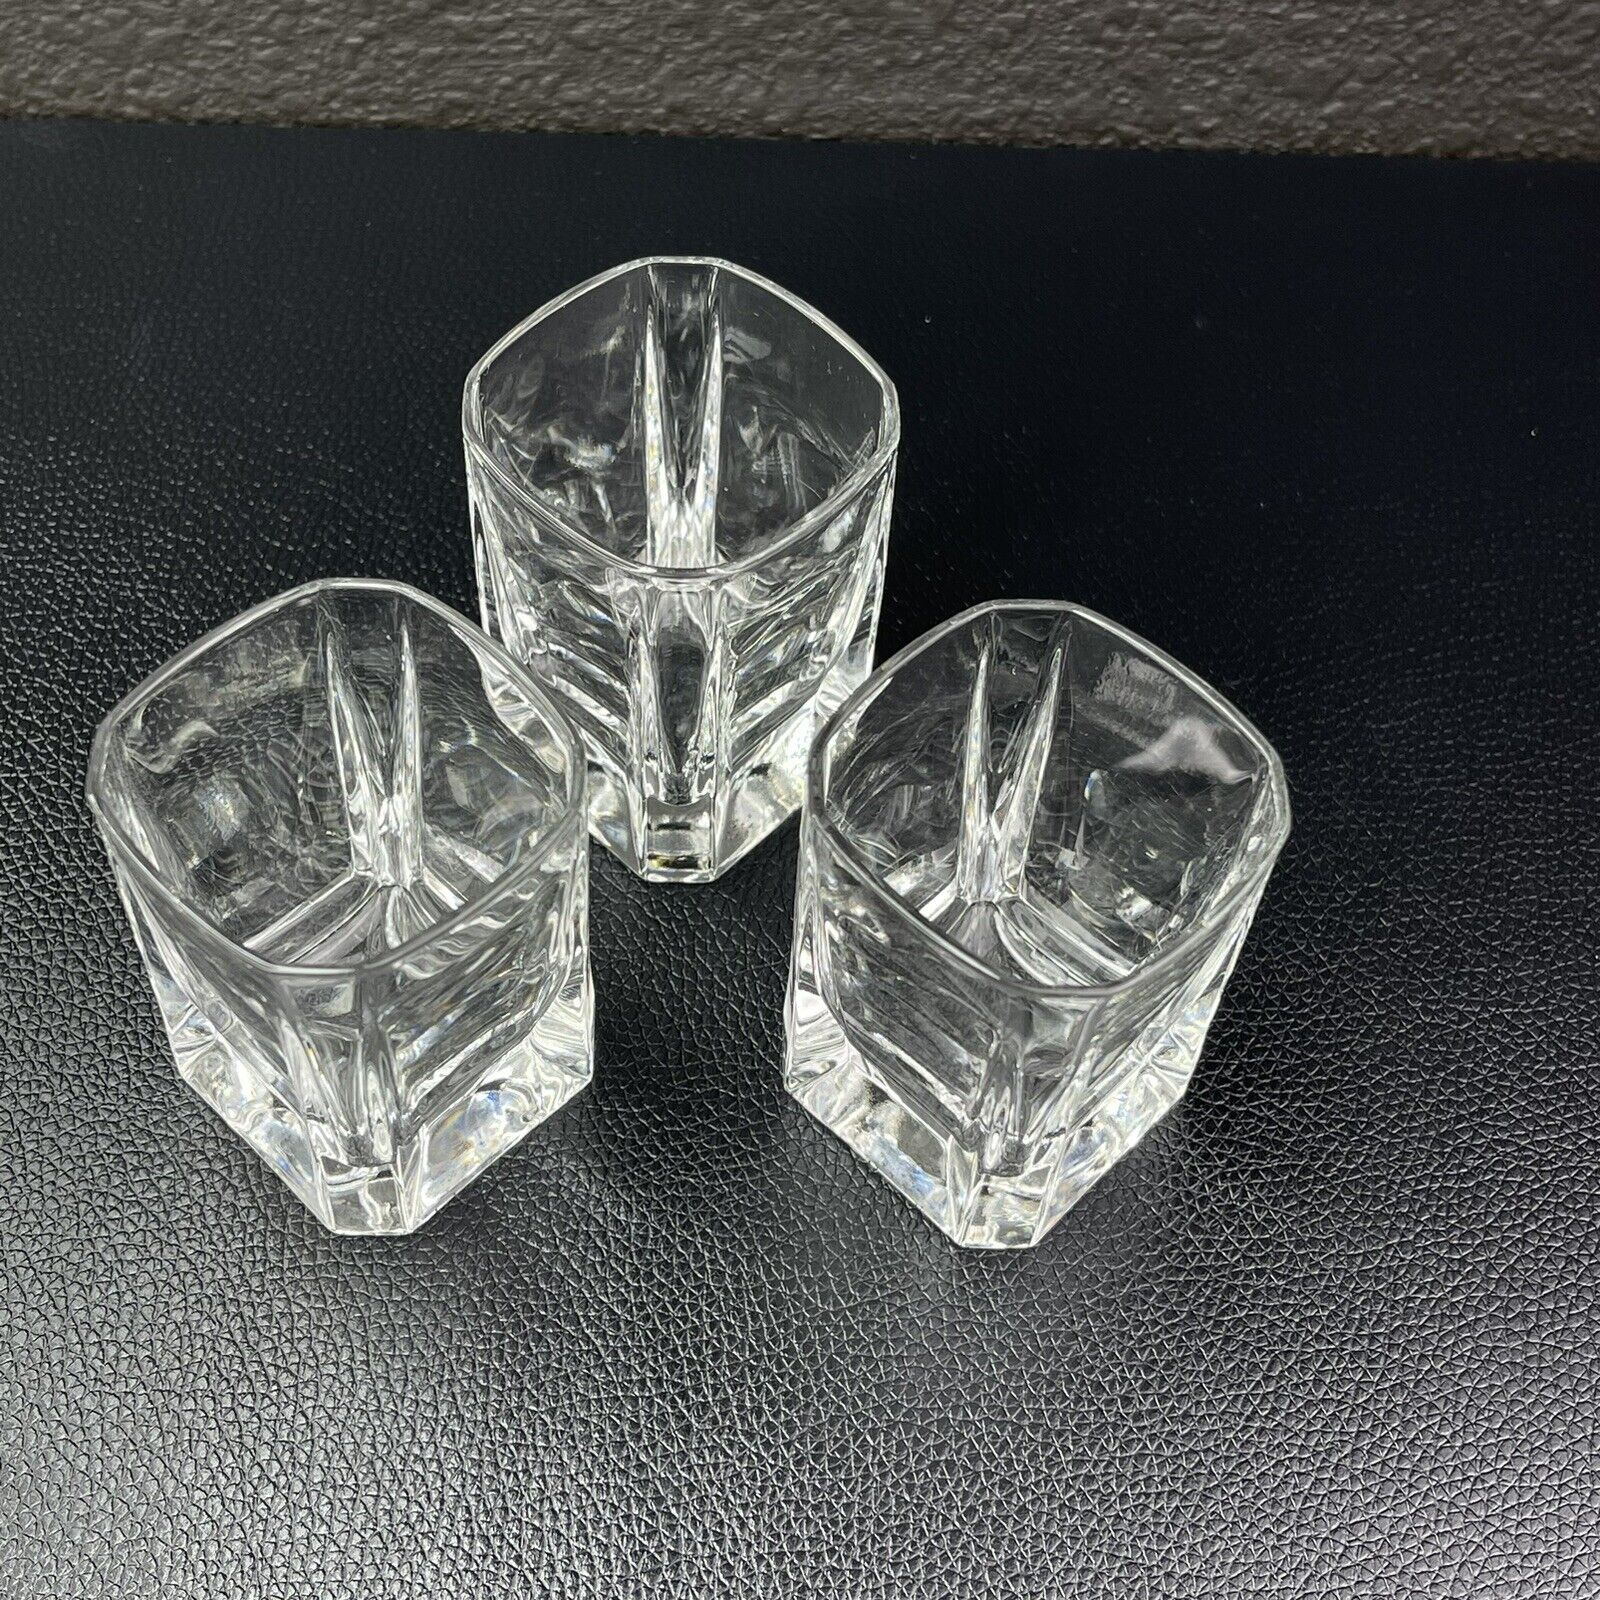 VTG Crystal Clear Shot Glasses set of 4 Glass Square Beautiful Color Cordial